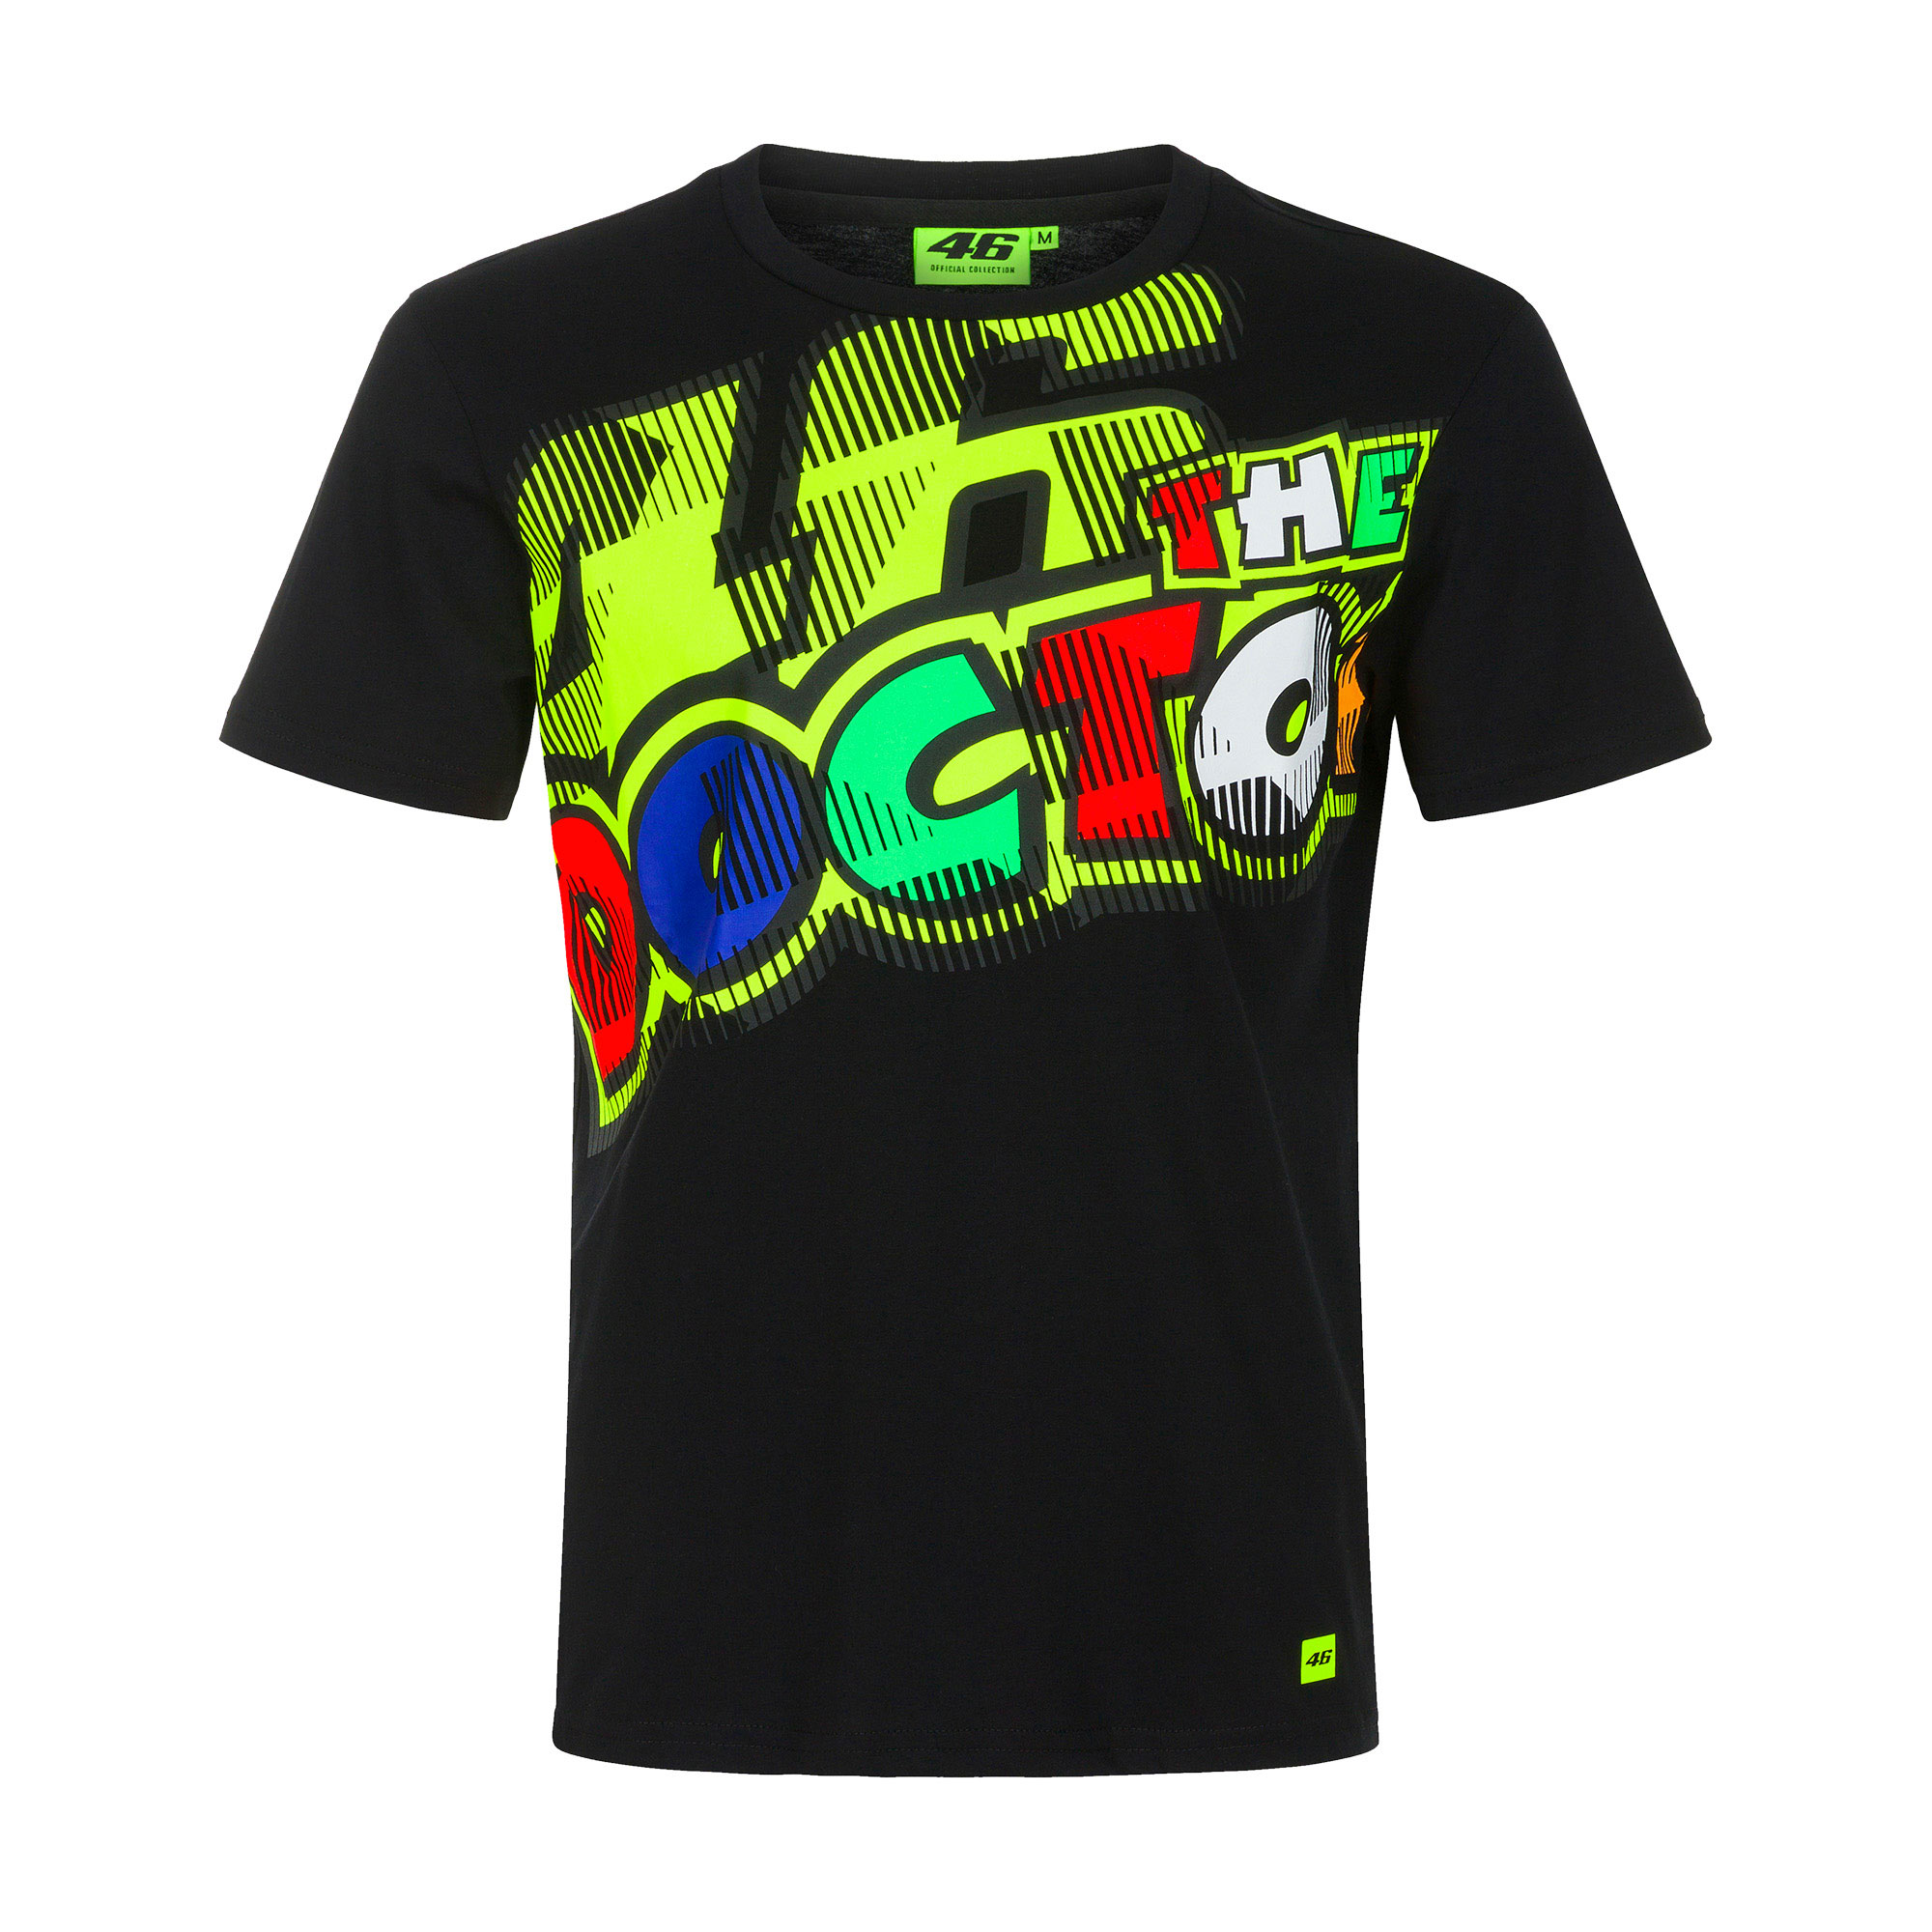 Valentino Rossi T-Shirt "46 The Doctor" - black